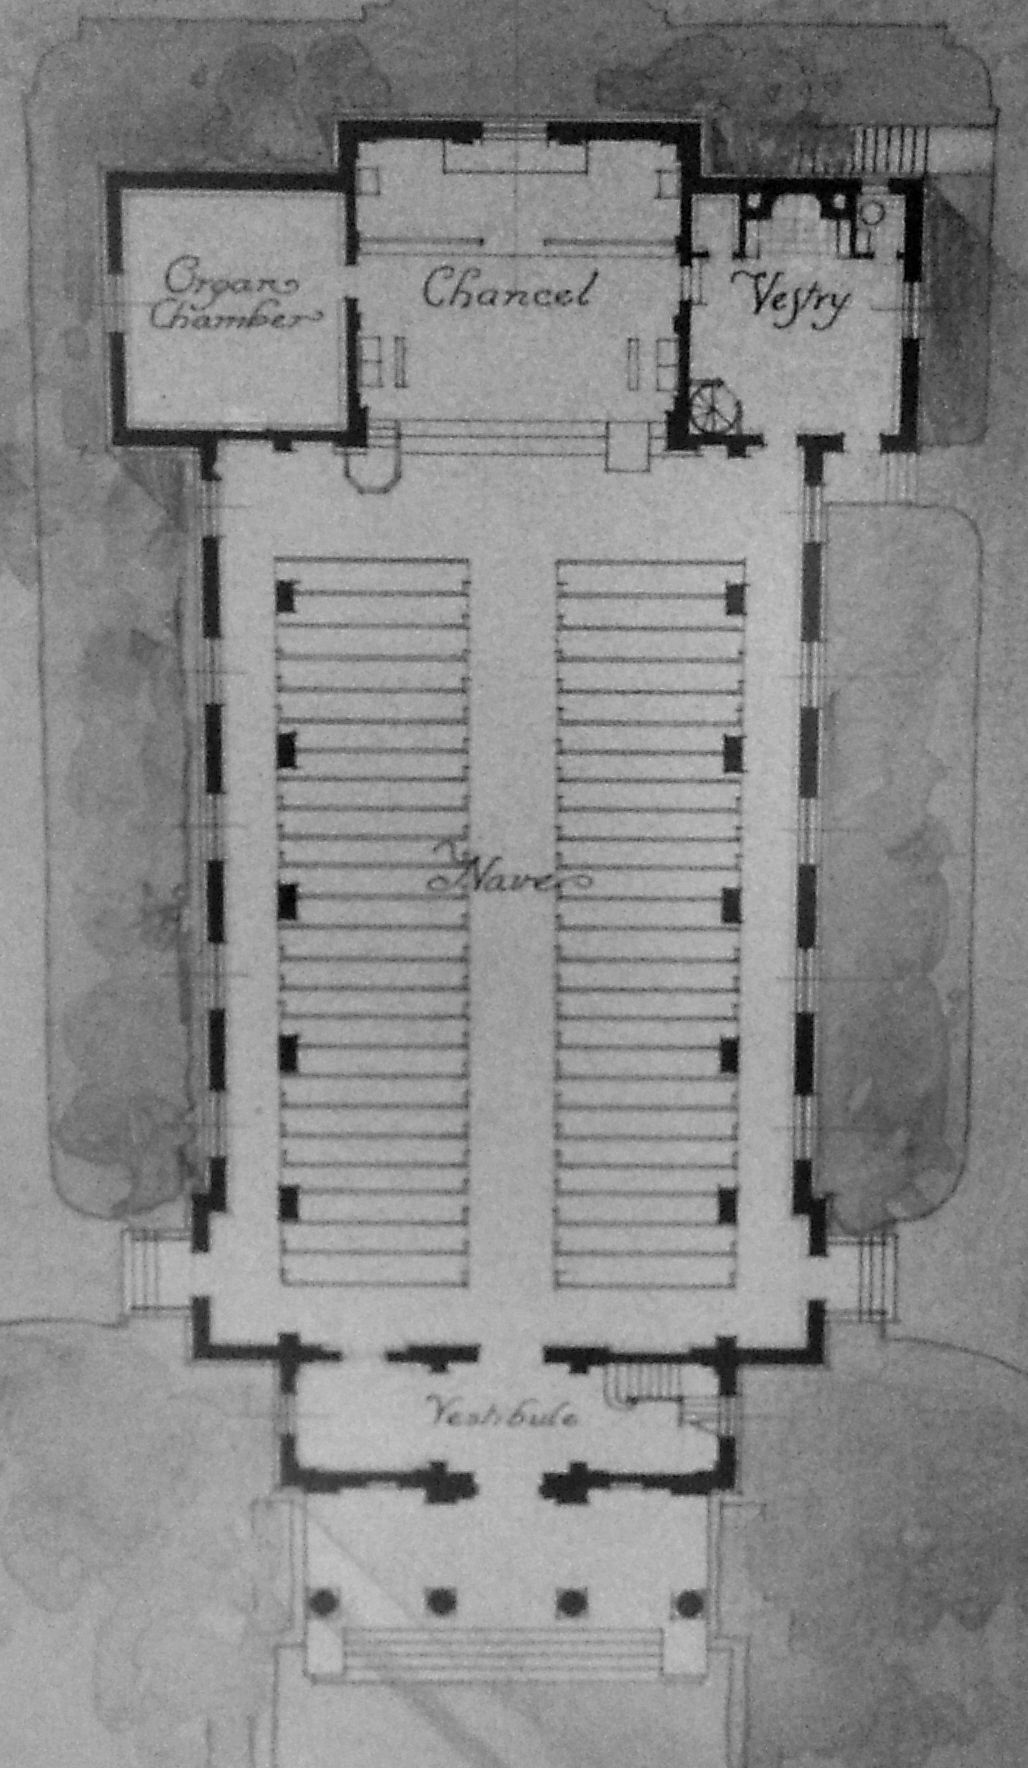 chapel floor plan with dimensions